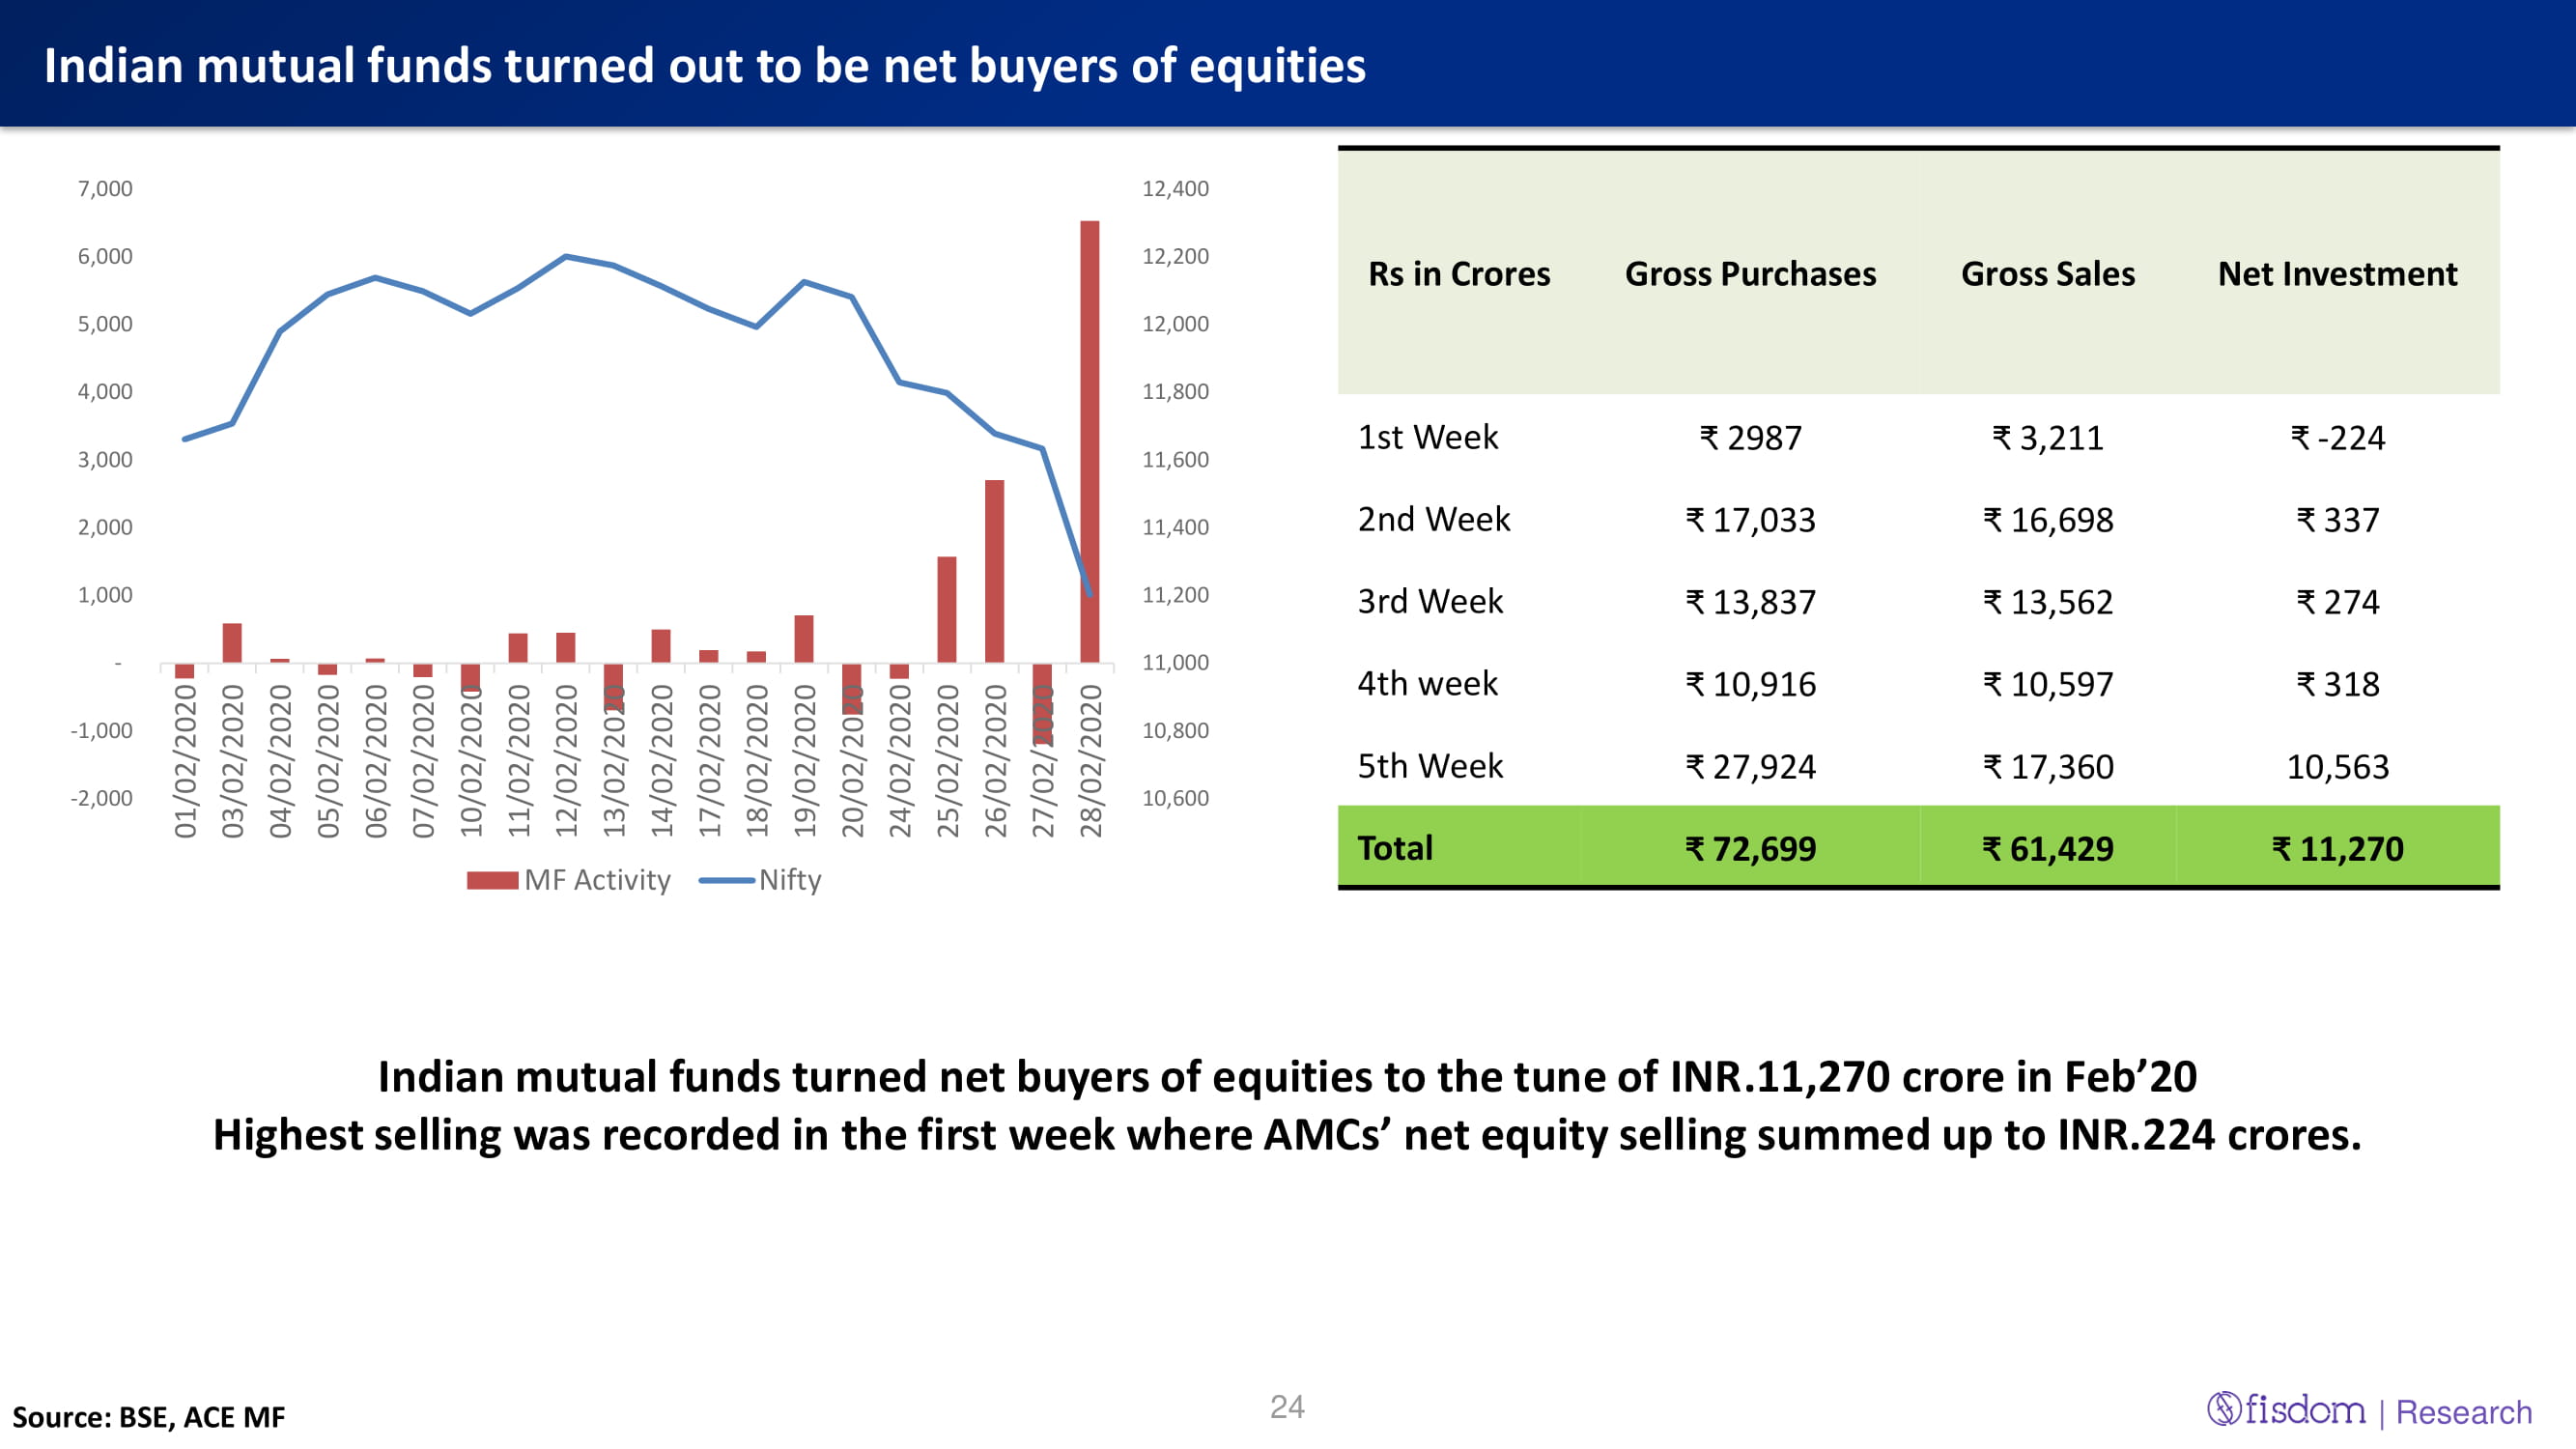 Indian mutual funds turned out to be net buyers of equities